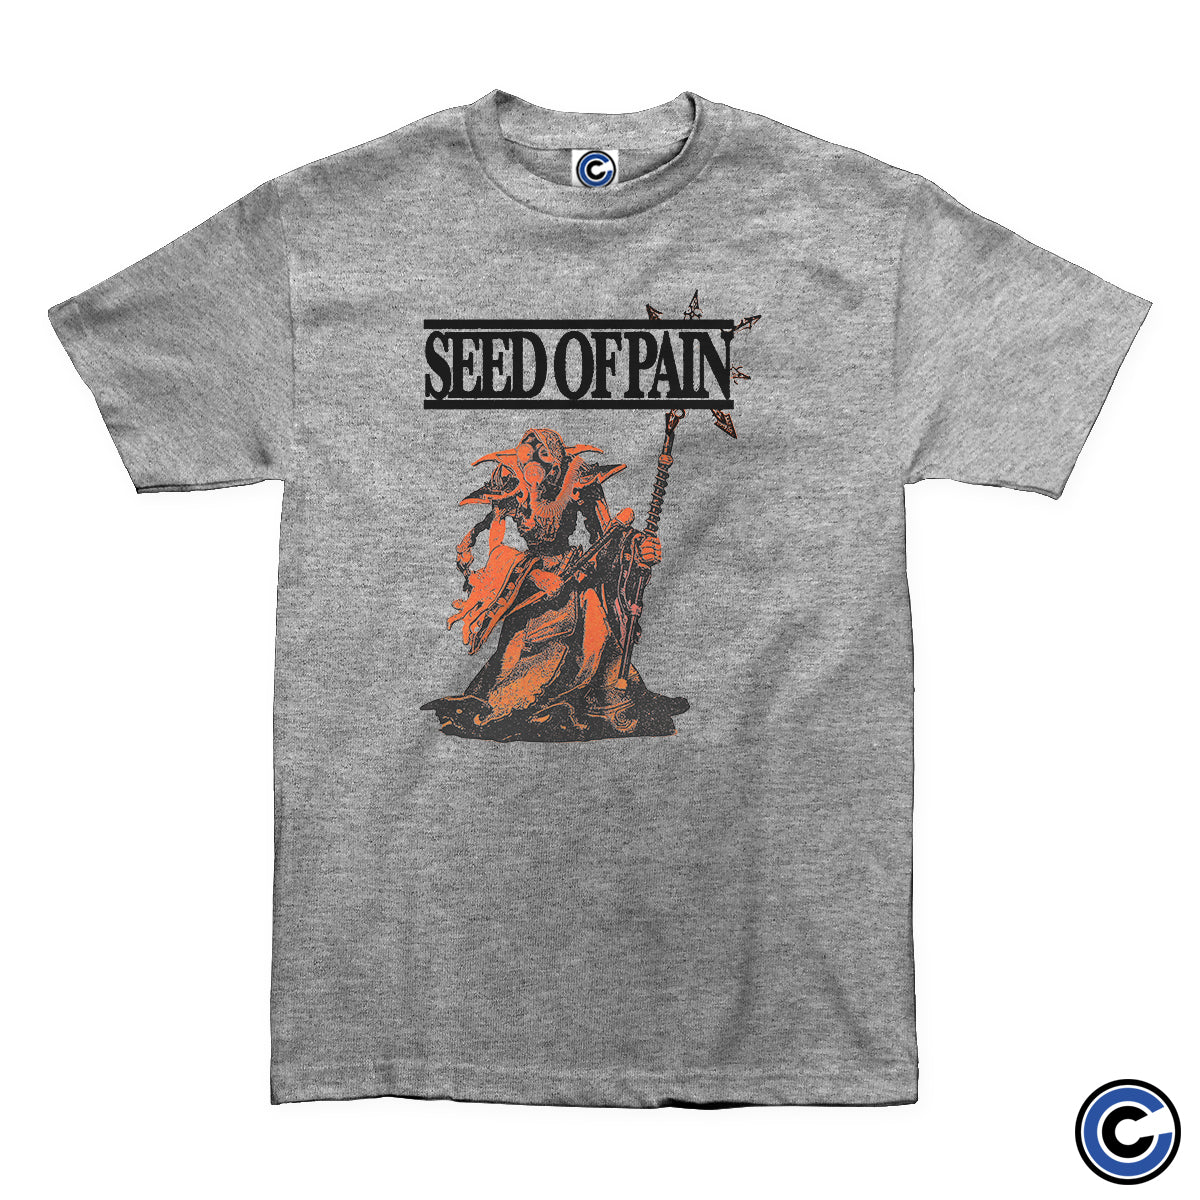 Seed of Pain "New Age" Shirt